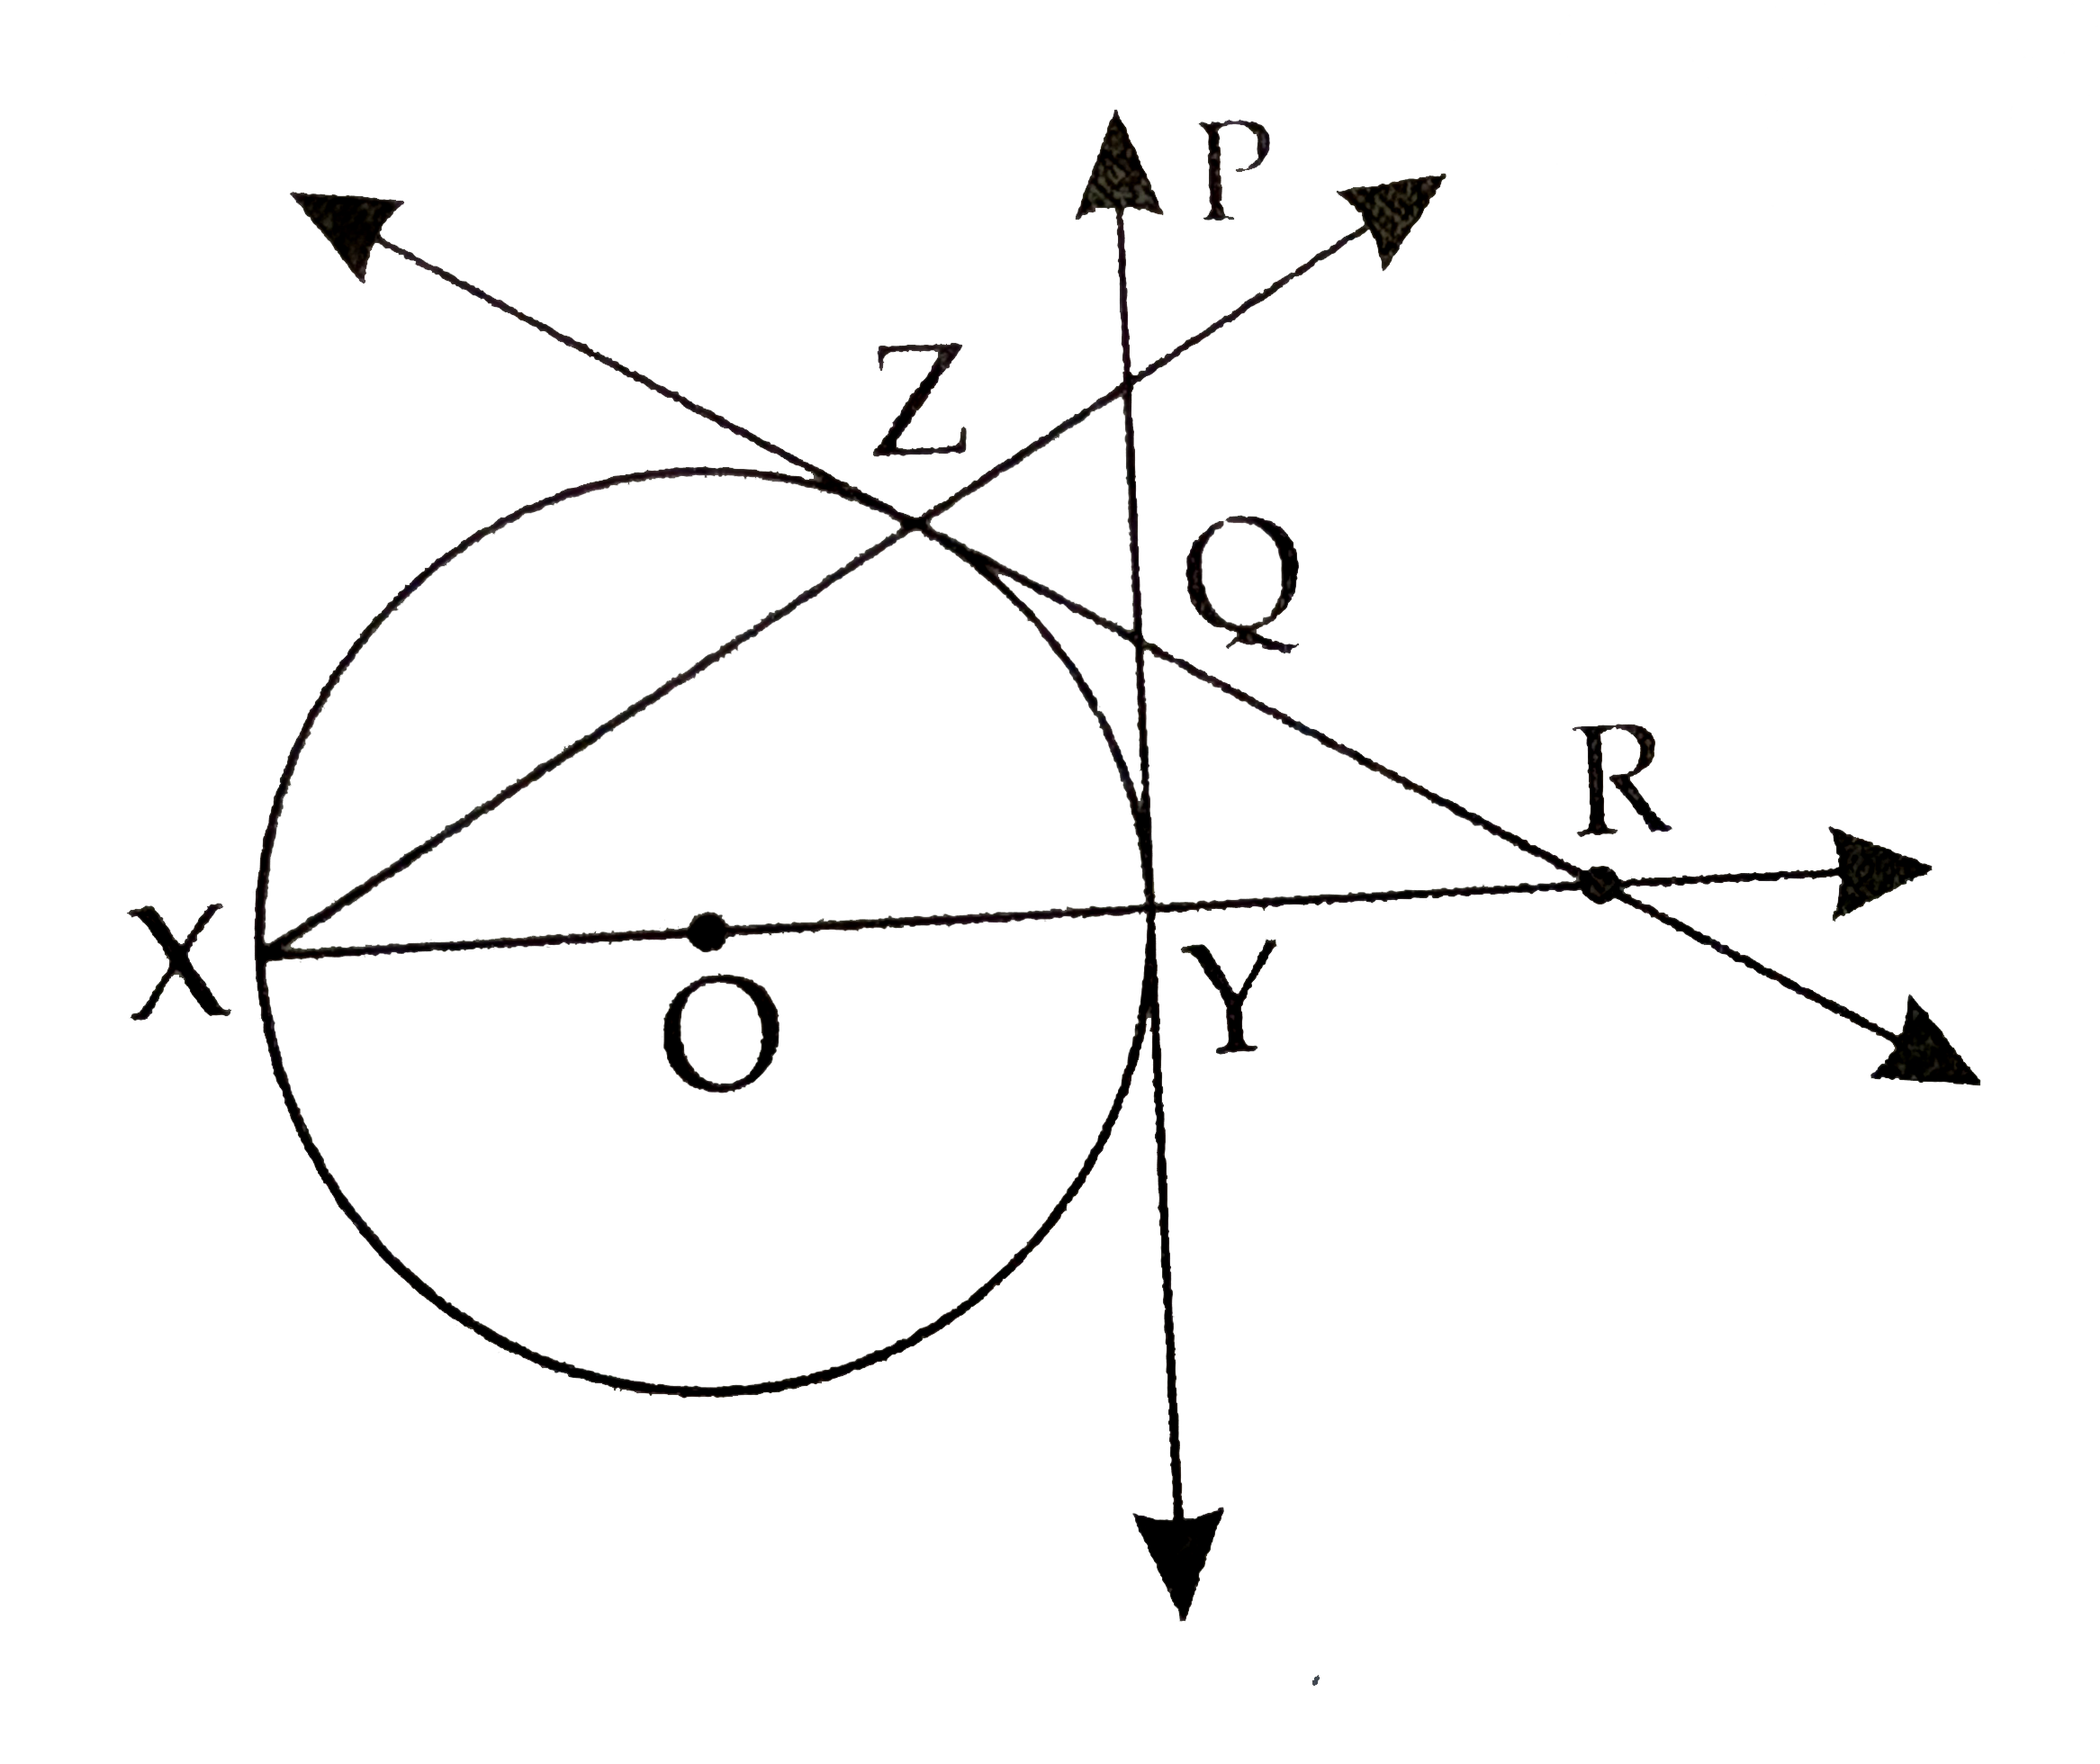 In  the adjoining figure, O is the centre of the circle XY is a diameter. OY = YR, O-Y-R, RZ is a tangent through Z.A thangent through the point Y intersects RZ in Q and XZ in P       prove that :  DeltaPQZ is an equilateral triangle.